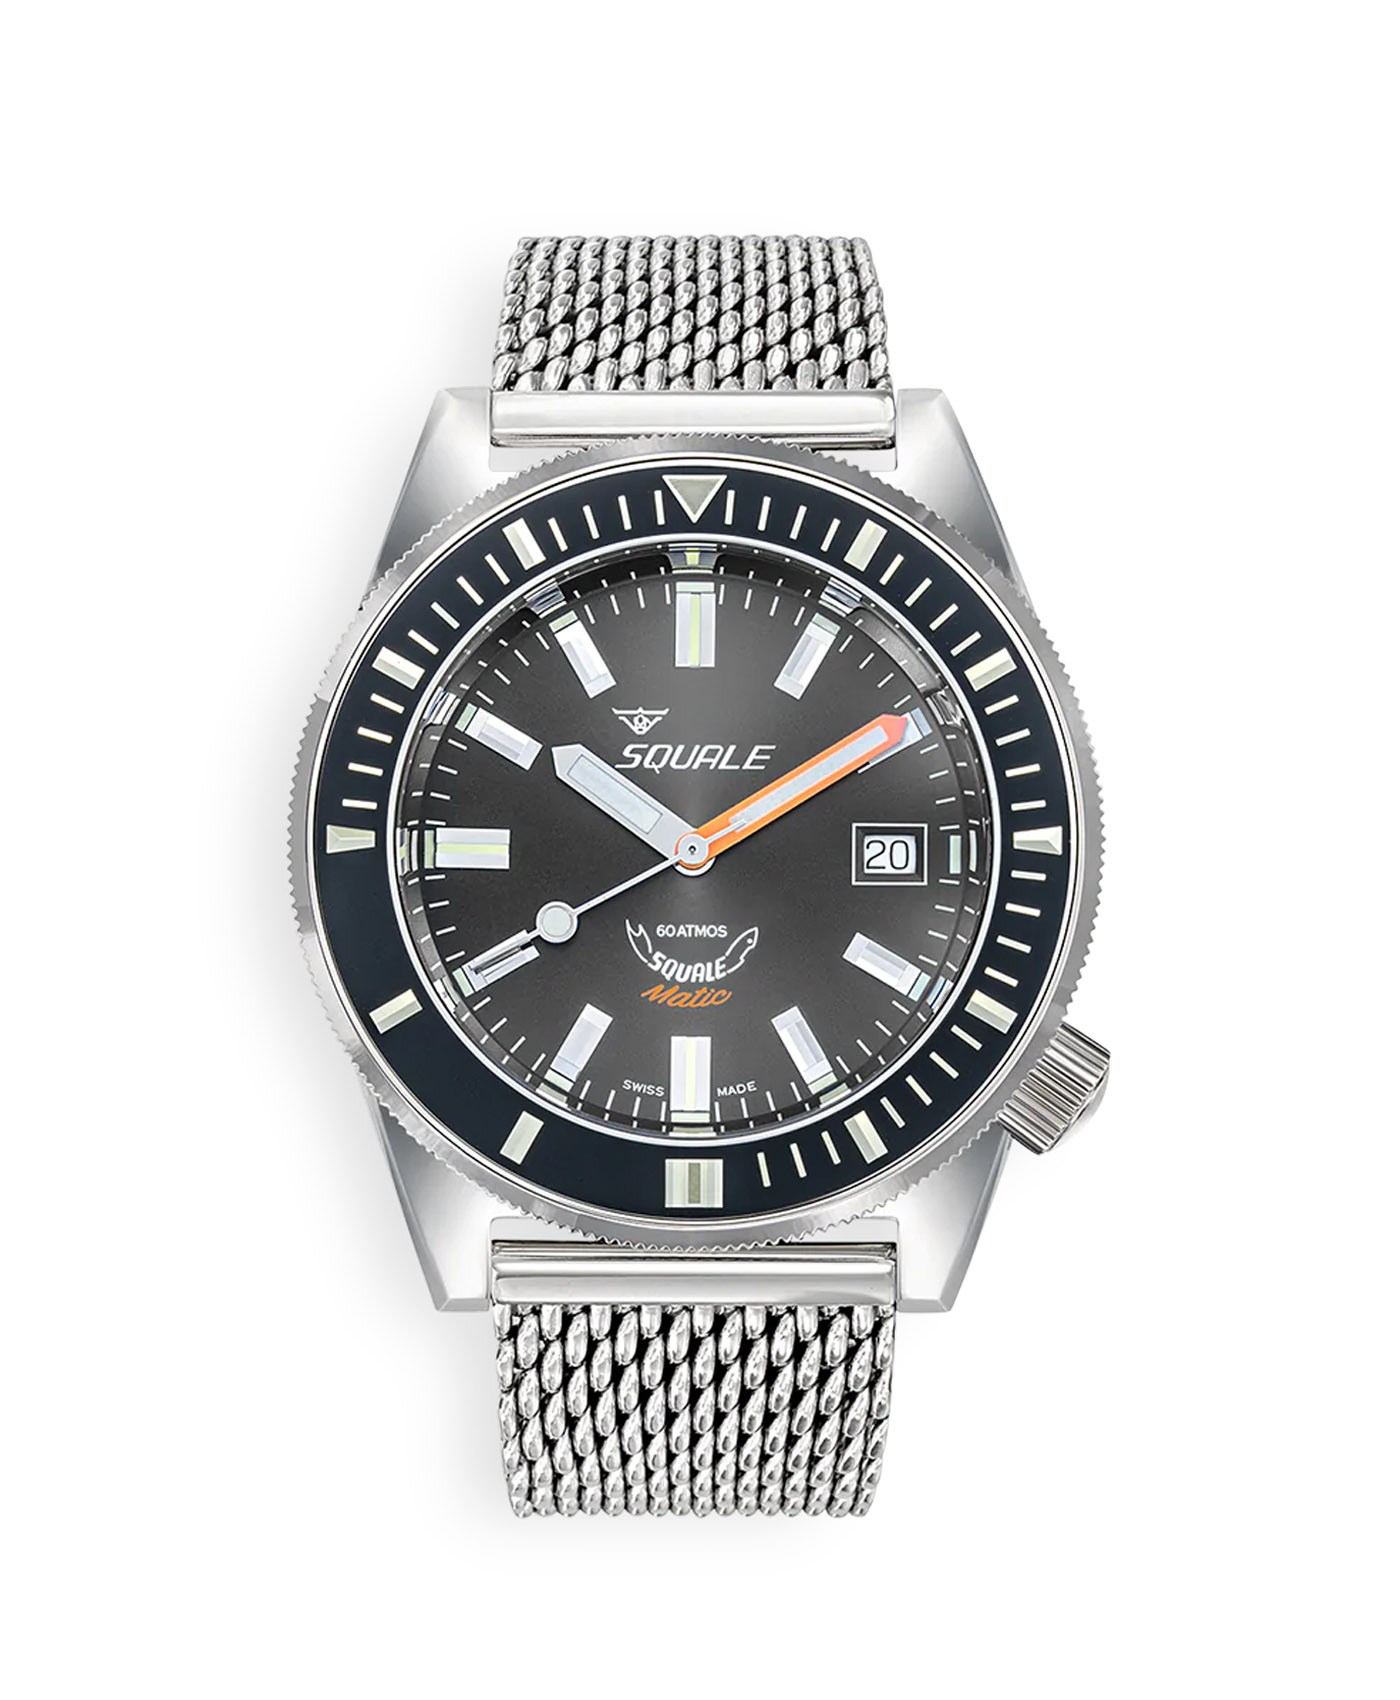 Squale - Matic - Grey 60 - ATM - Mesh-min